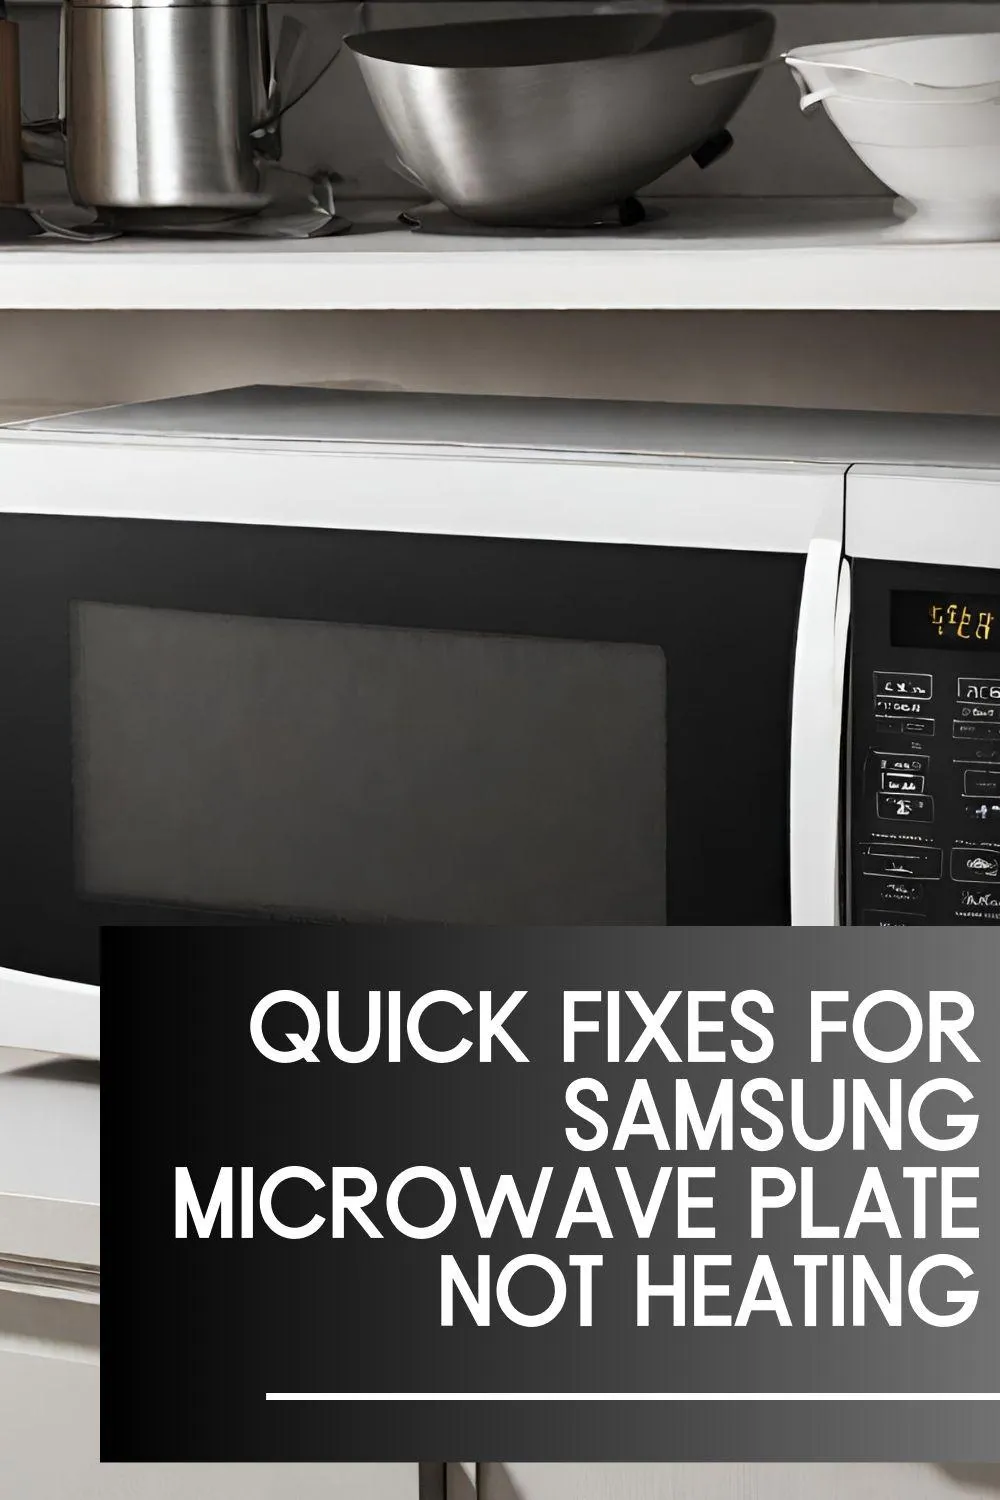 Troubleshooting Guide: Samsung Microwave Plate Not Heating